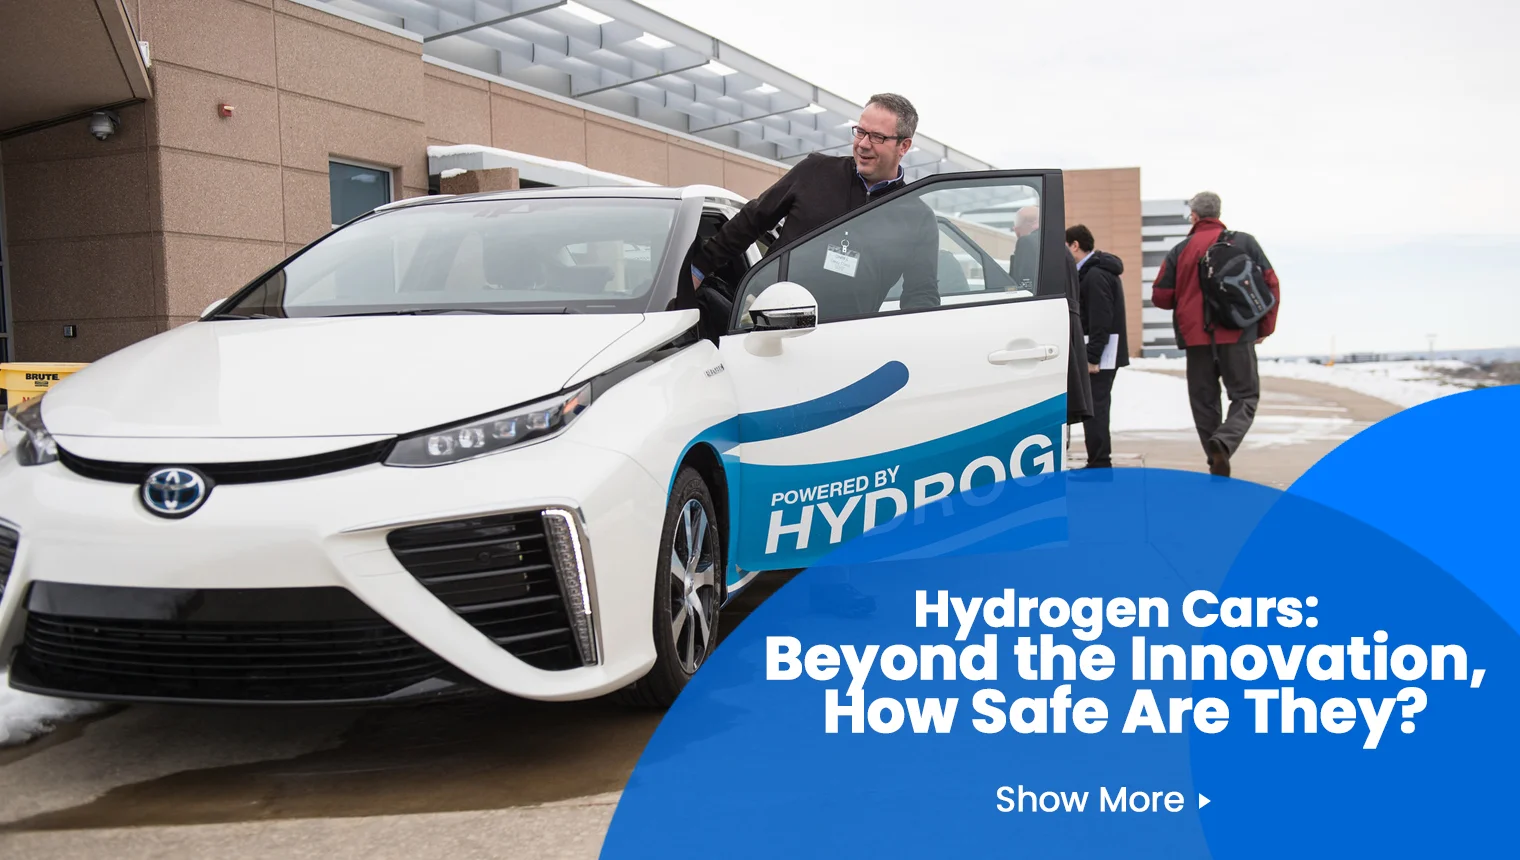 Hydrogen Cars: Beyond the Innovation – How Safe Are They